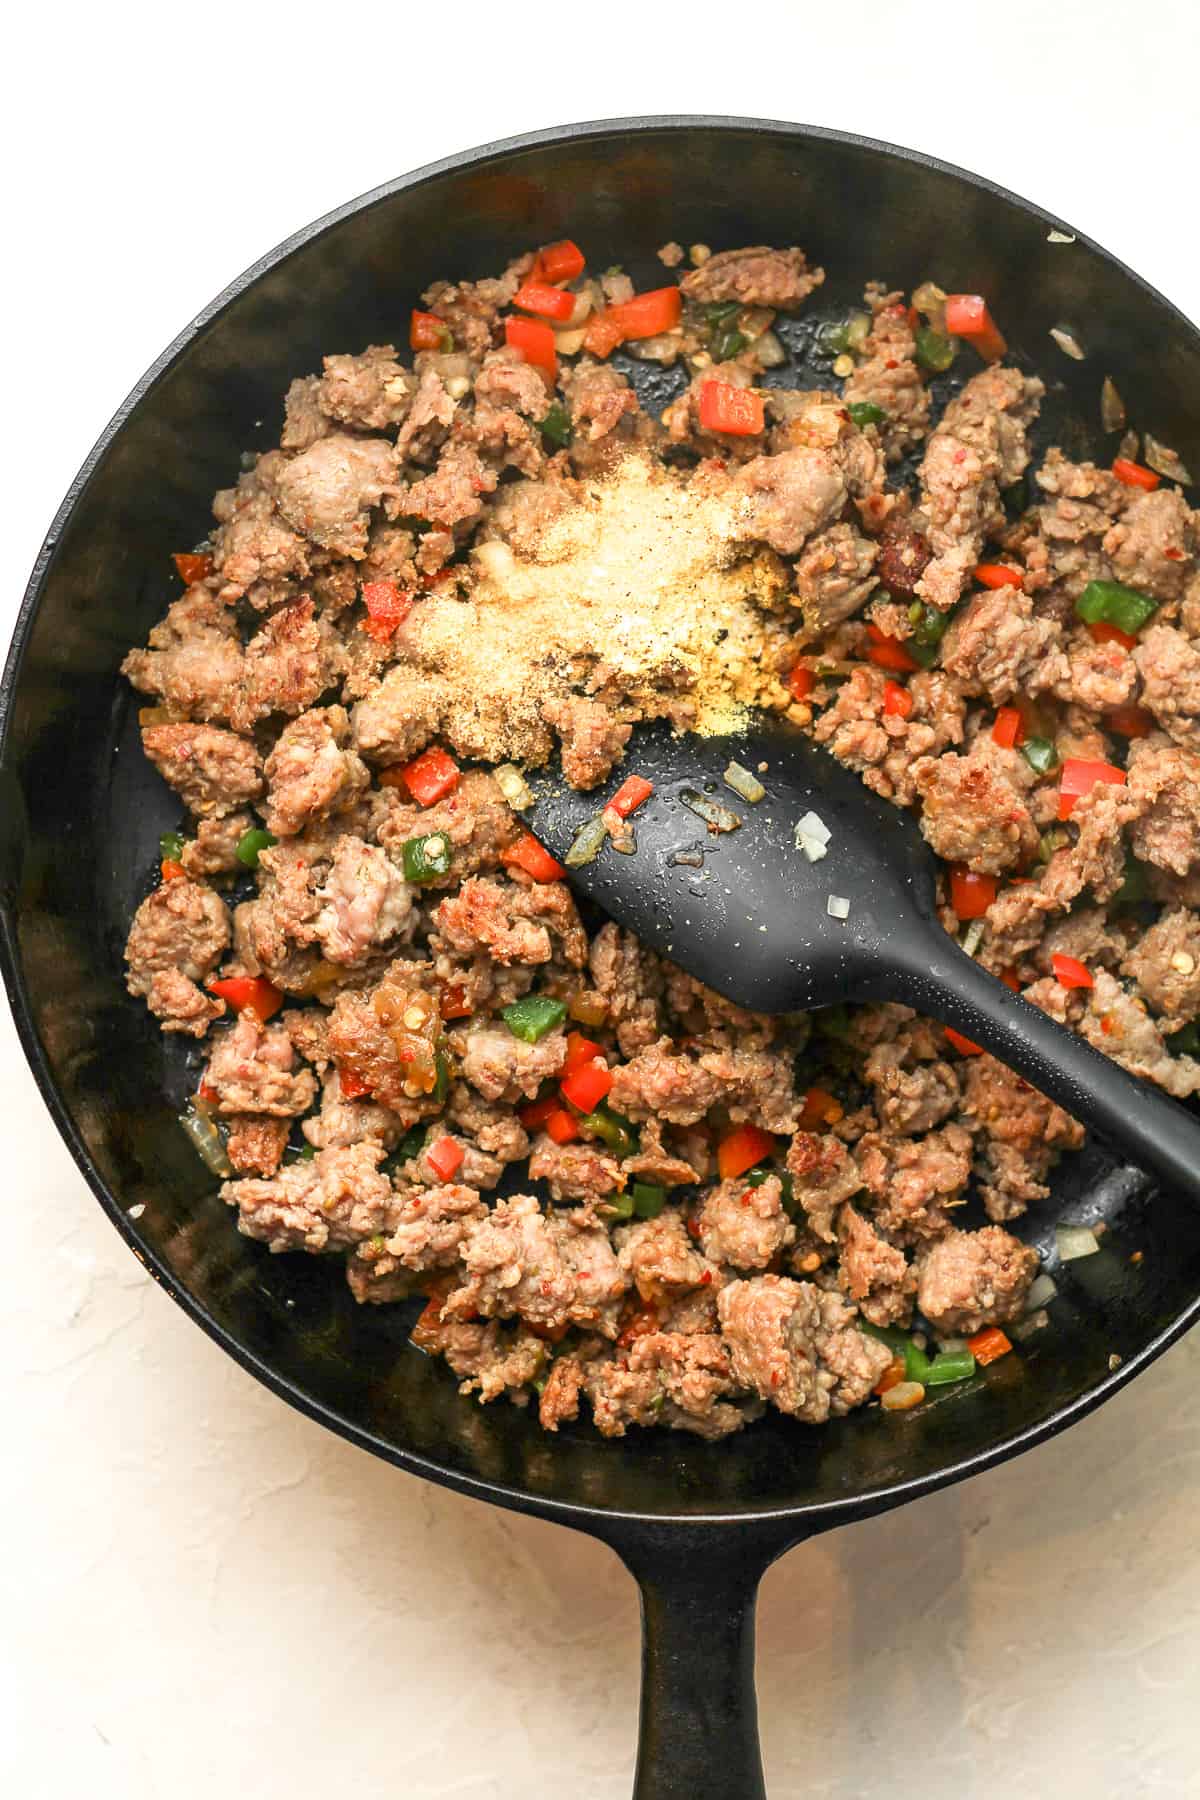 A skillet of the browned sausage with seasonings.